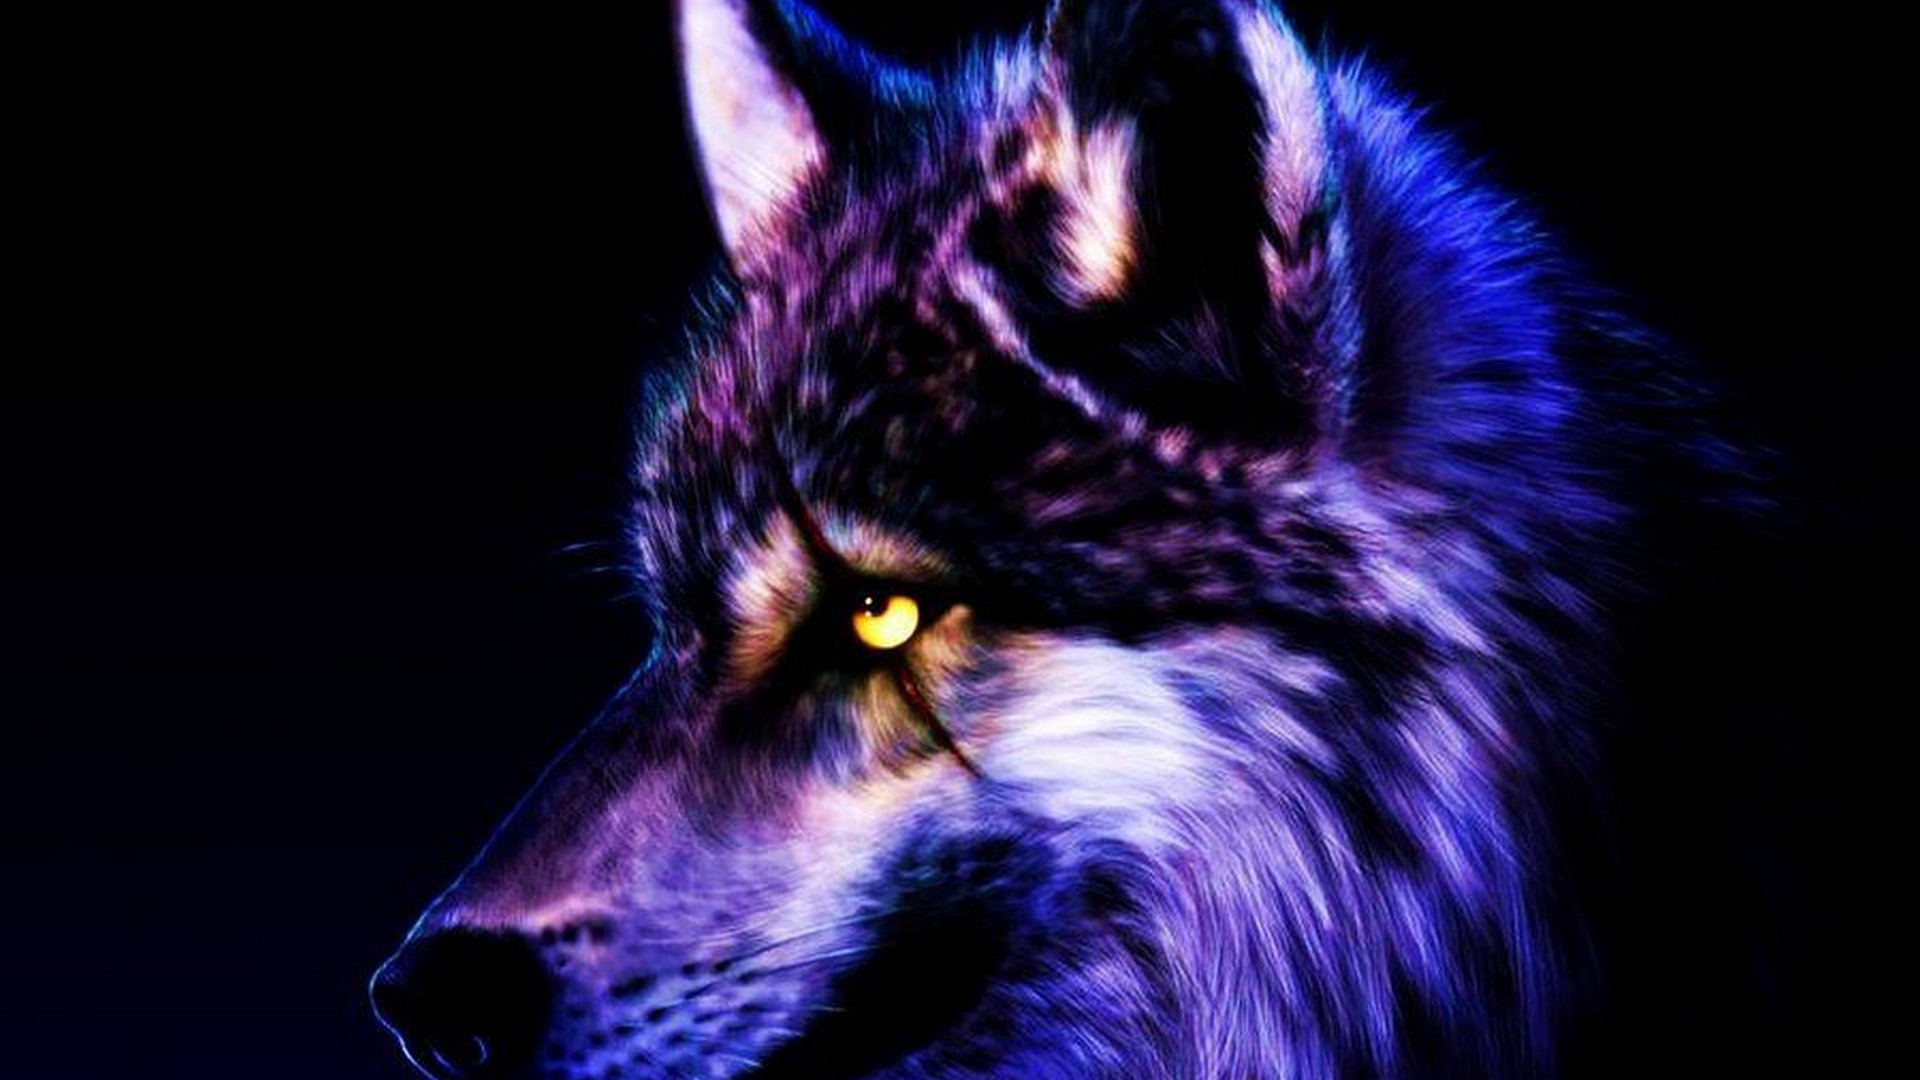 HD Cool Wolf Backgrounds with high-resolution 1920x1080 pixel. You can use this wallpaper for your Windows and Mac OS computers as well as your Android and iPhone smartphones